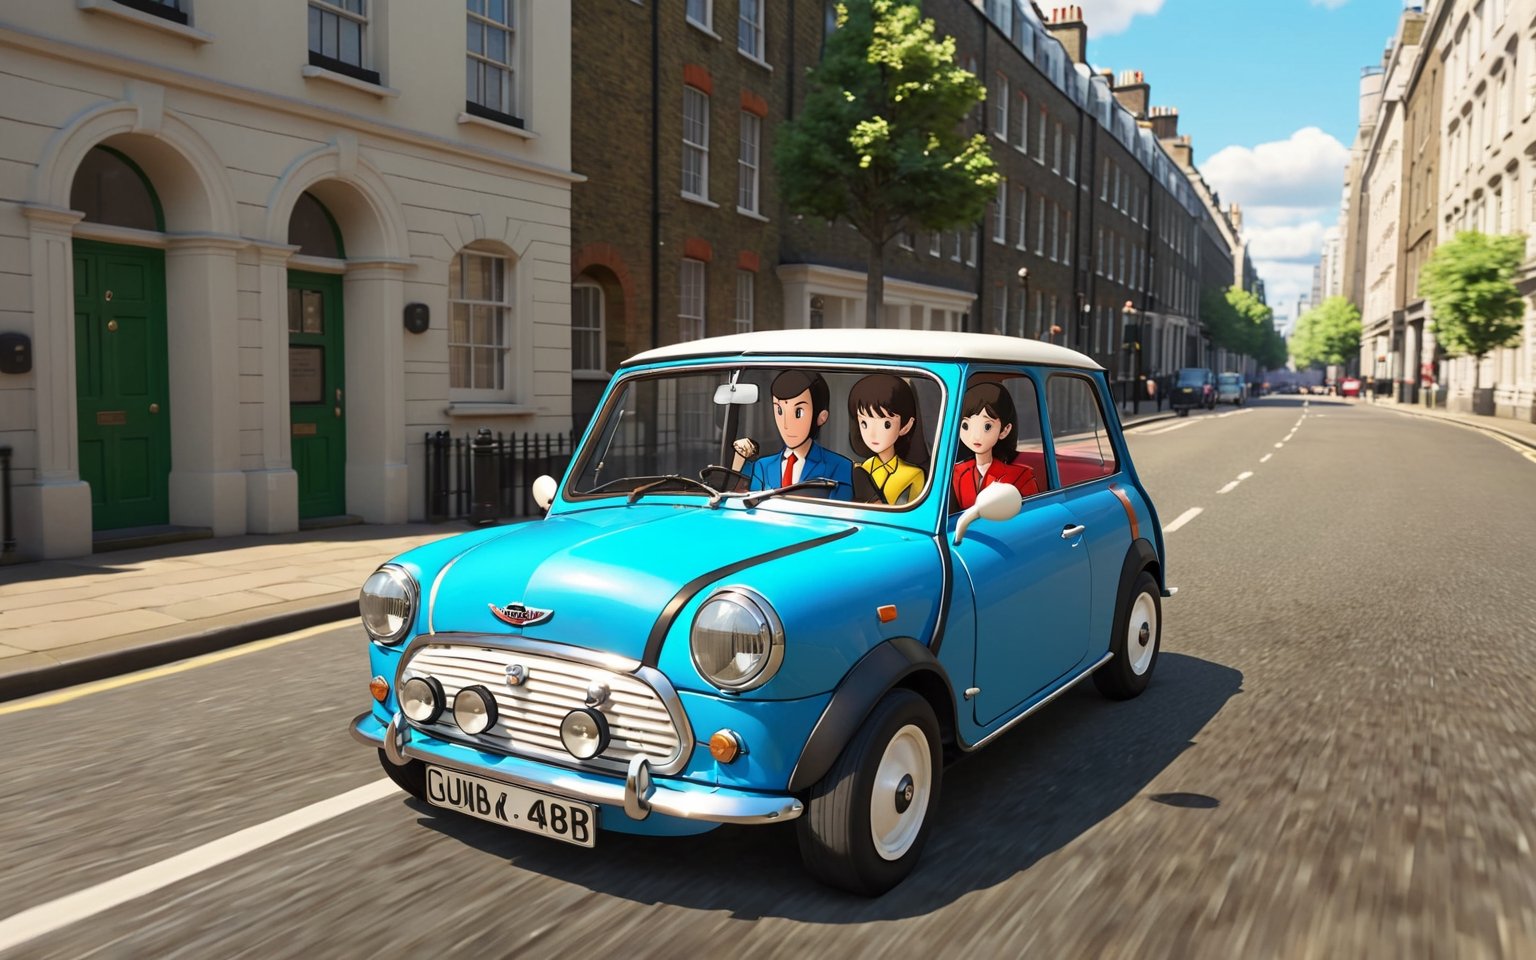 Lupin the 3rd, Lupin and Fujiko driving austin mini cooper, London city, 
(full body:1.0), from bellow, high quality skin texture rendering, curved body, masterpiece, 8k, high resolution, ghibli, ,r0b0cap,StdGBRedmAF